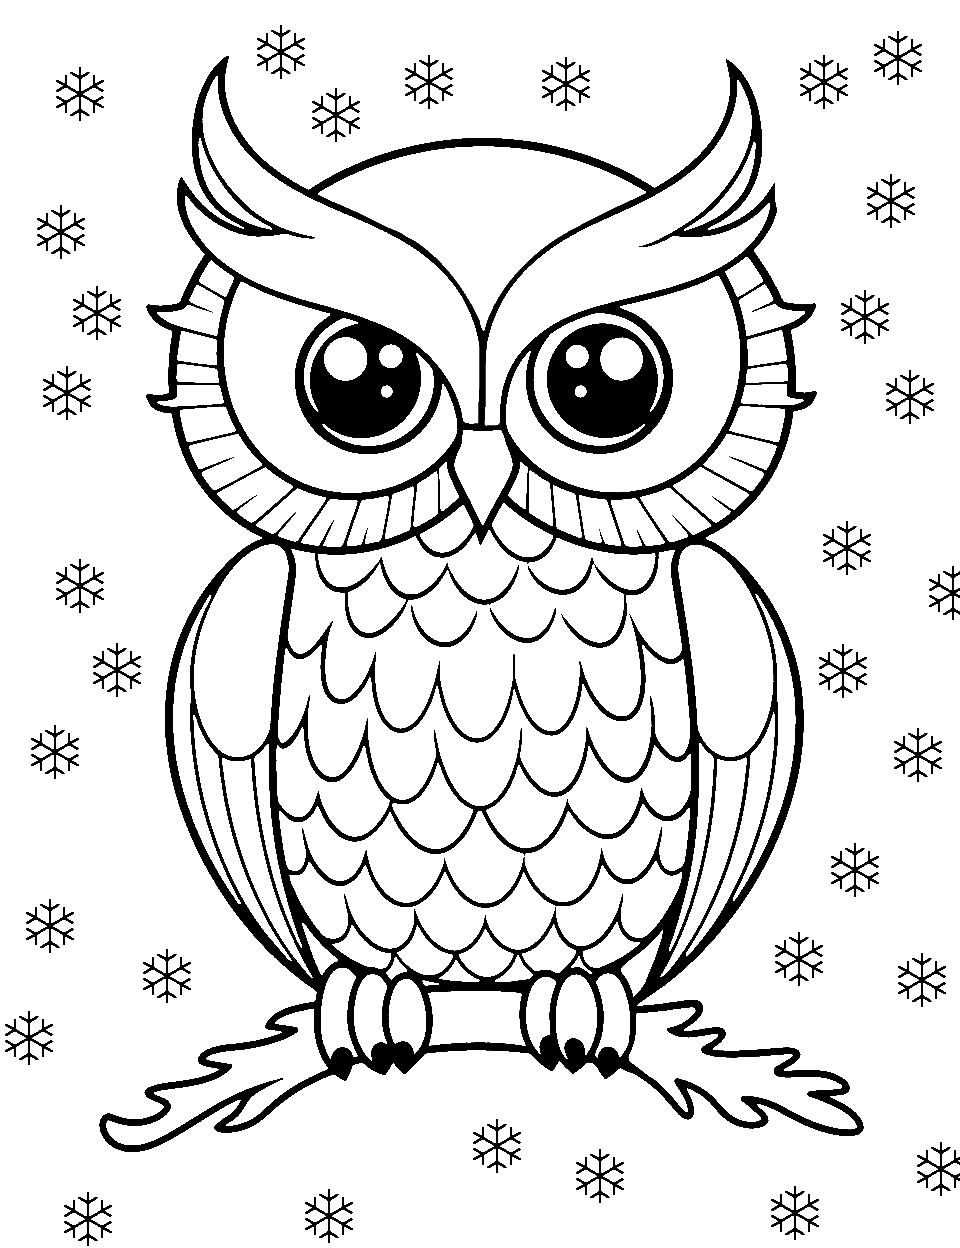 Winter Owl with Snowflakes Coloring Page - An owl surrounded by falling snowflakes.